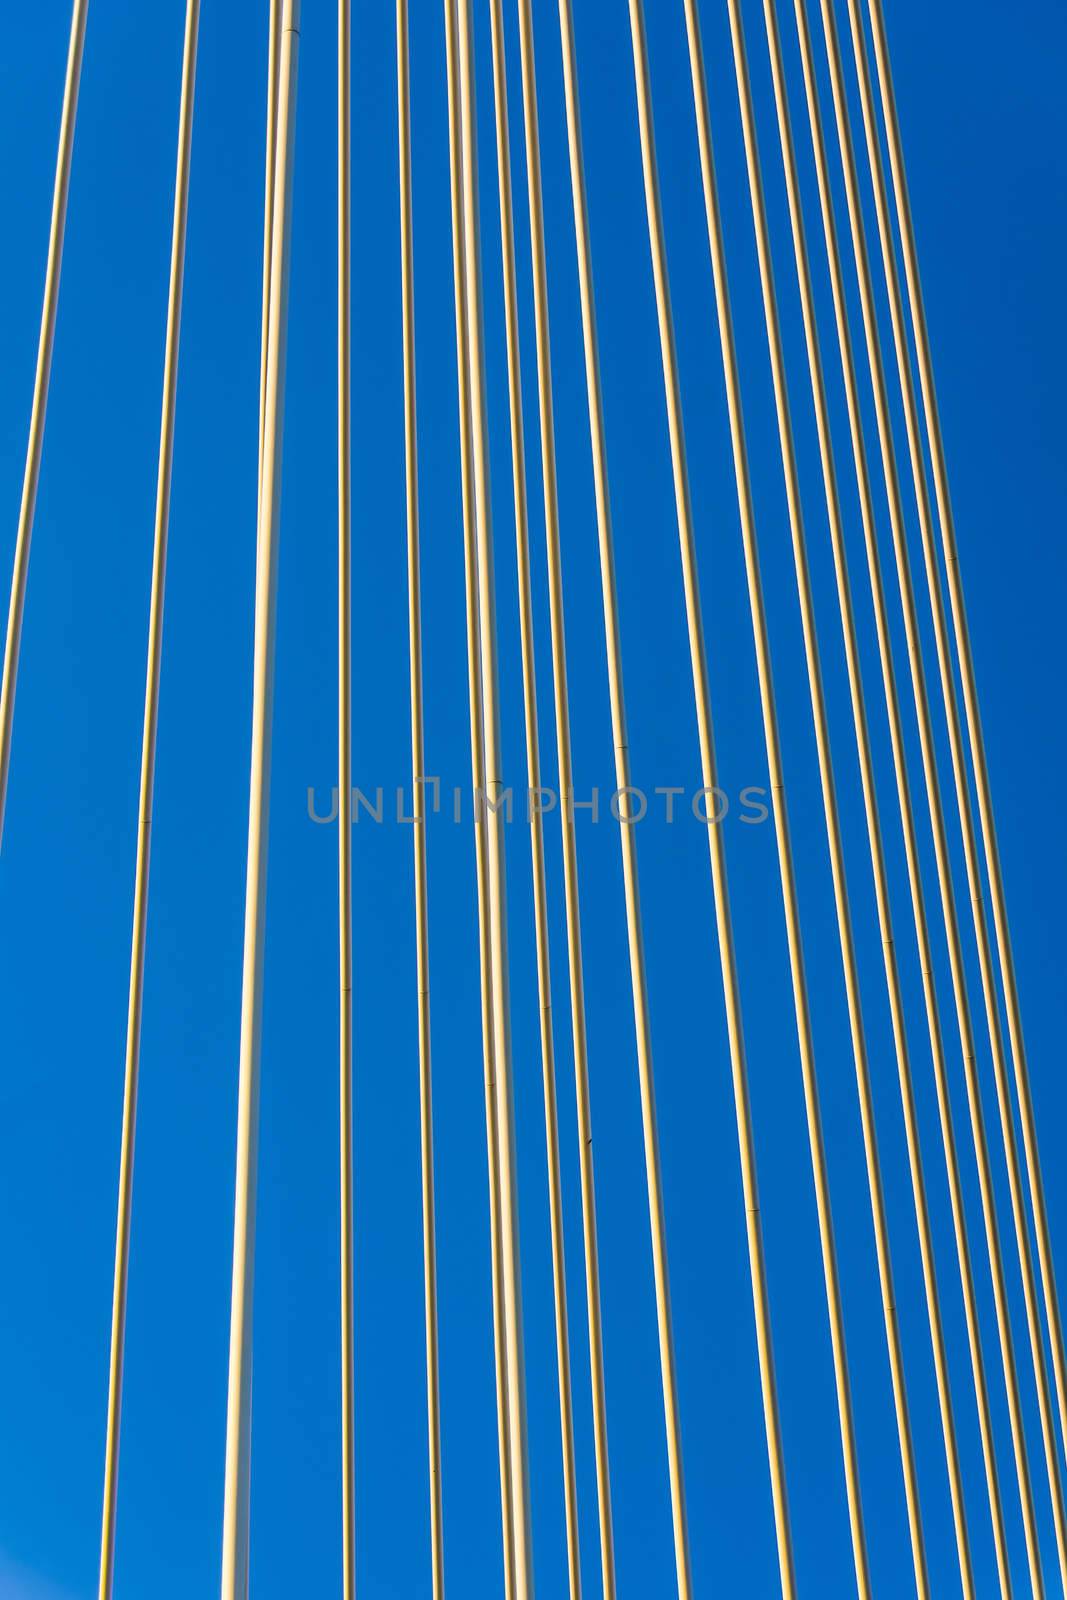 Closeup of cable-stayed bridge